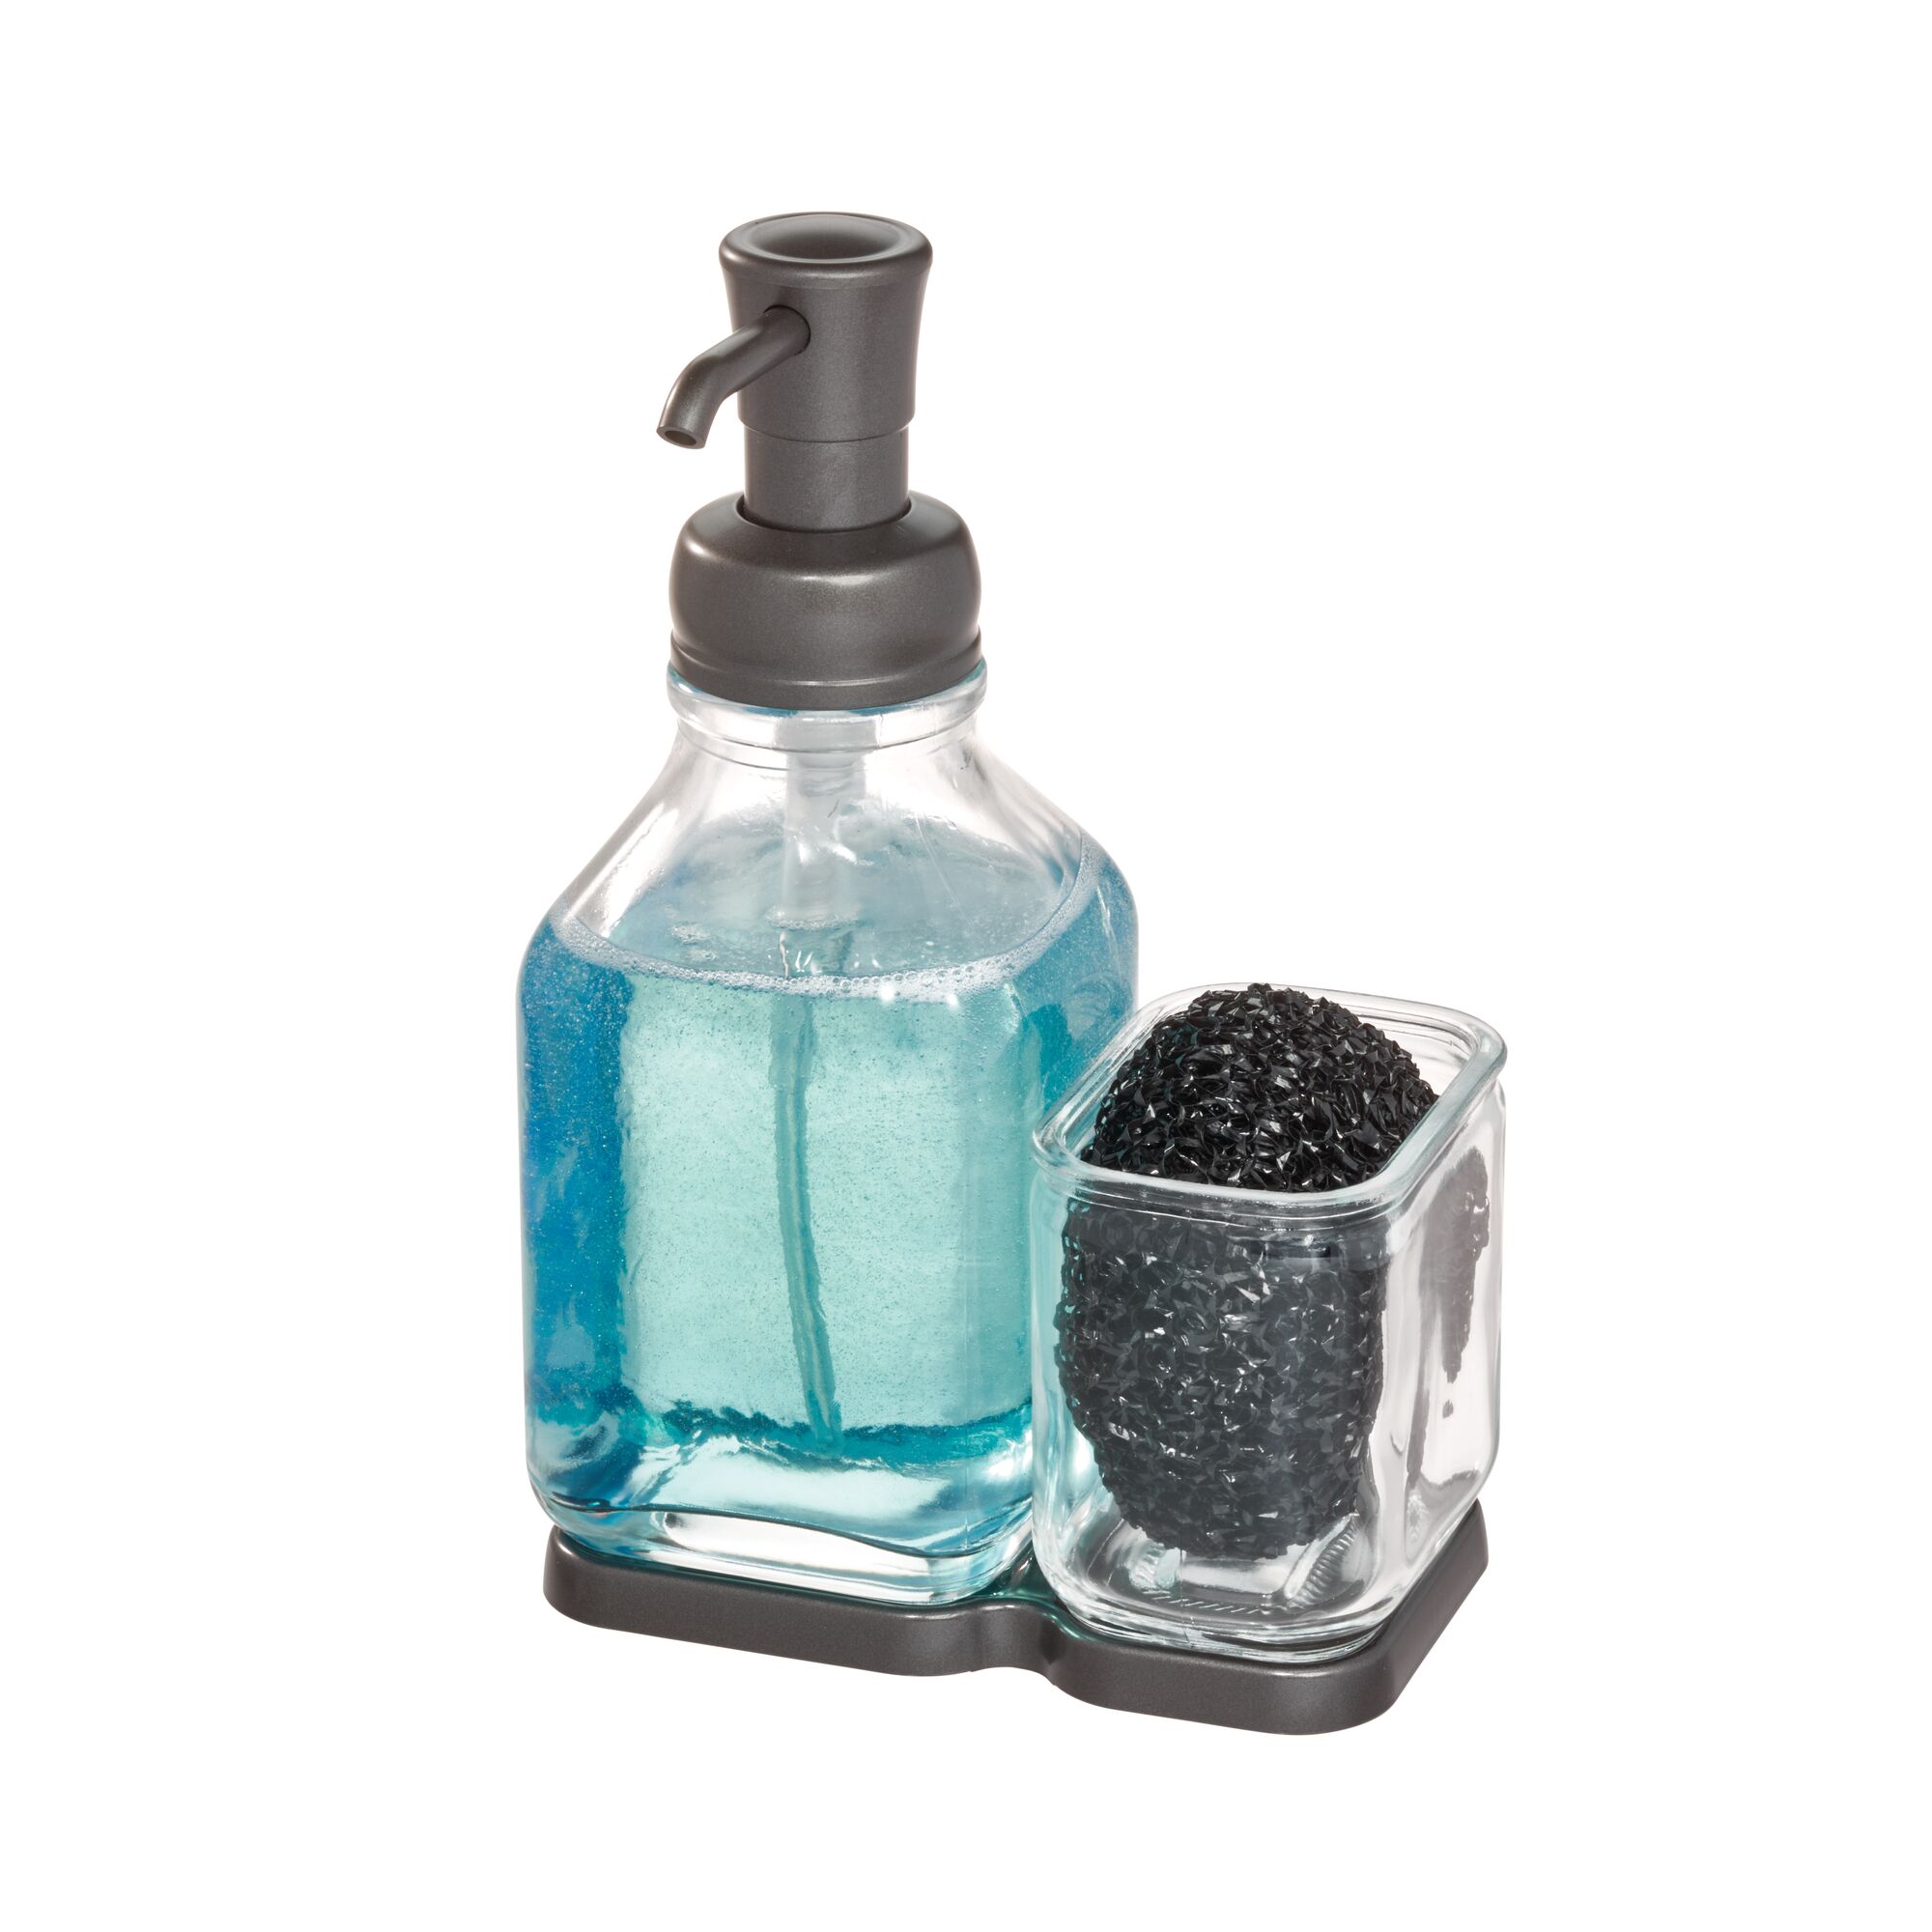 Better Homes & Gardens Countertop Glass Soap Pump & Sponge Caddy, 8.25" x 3.25" x 5.37", Clear - image 1 of 6